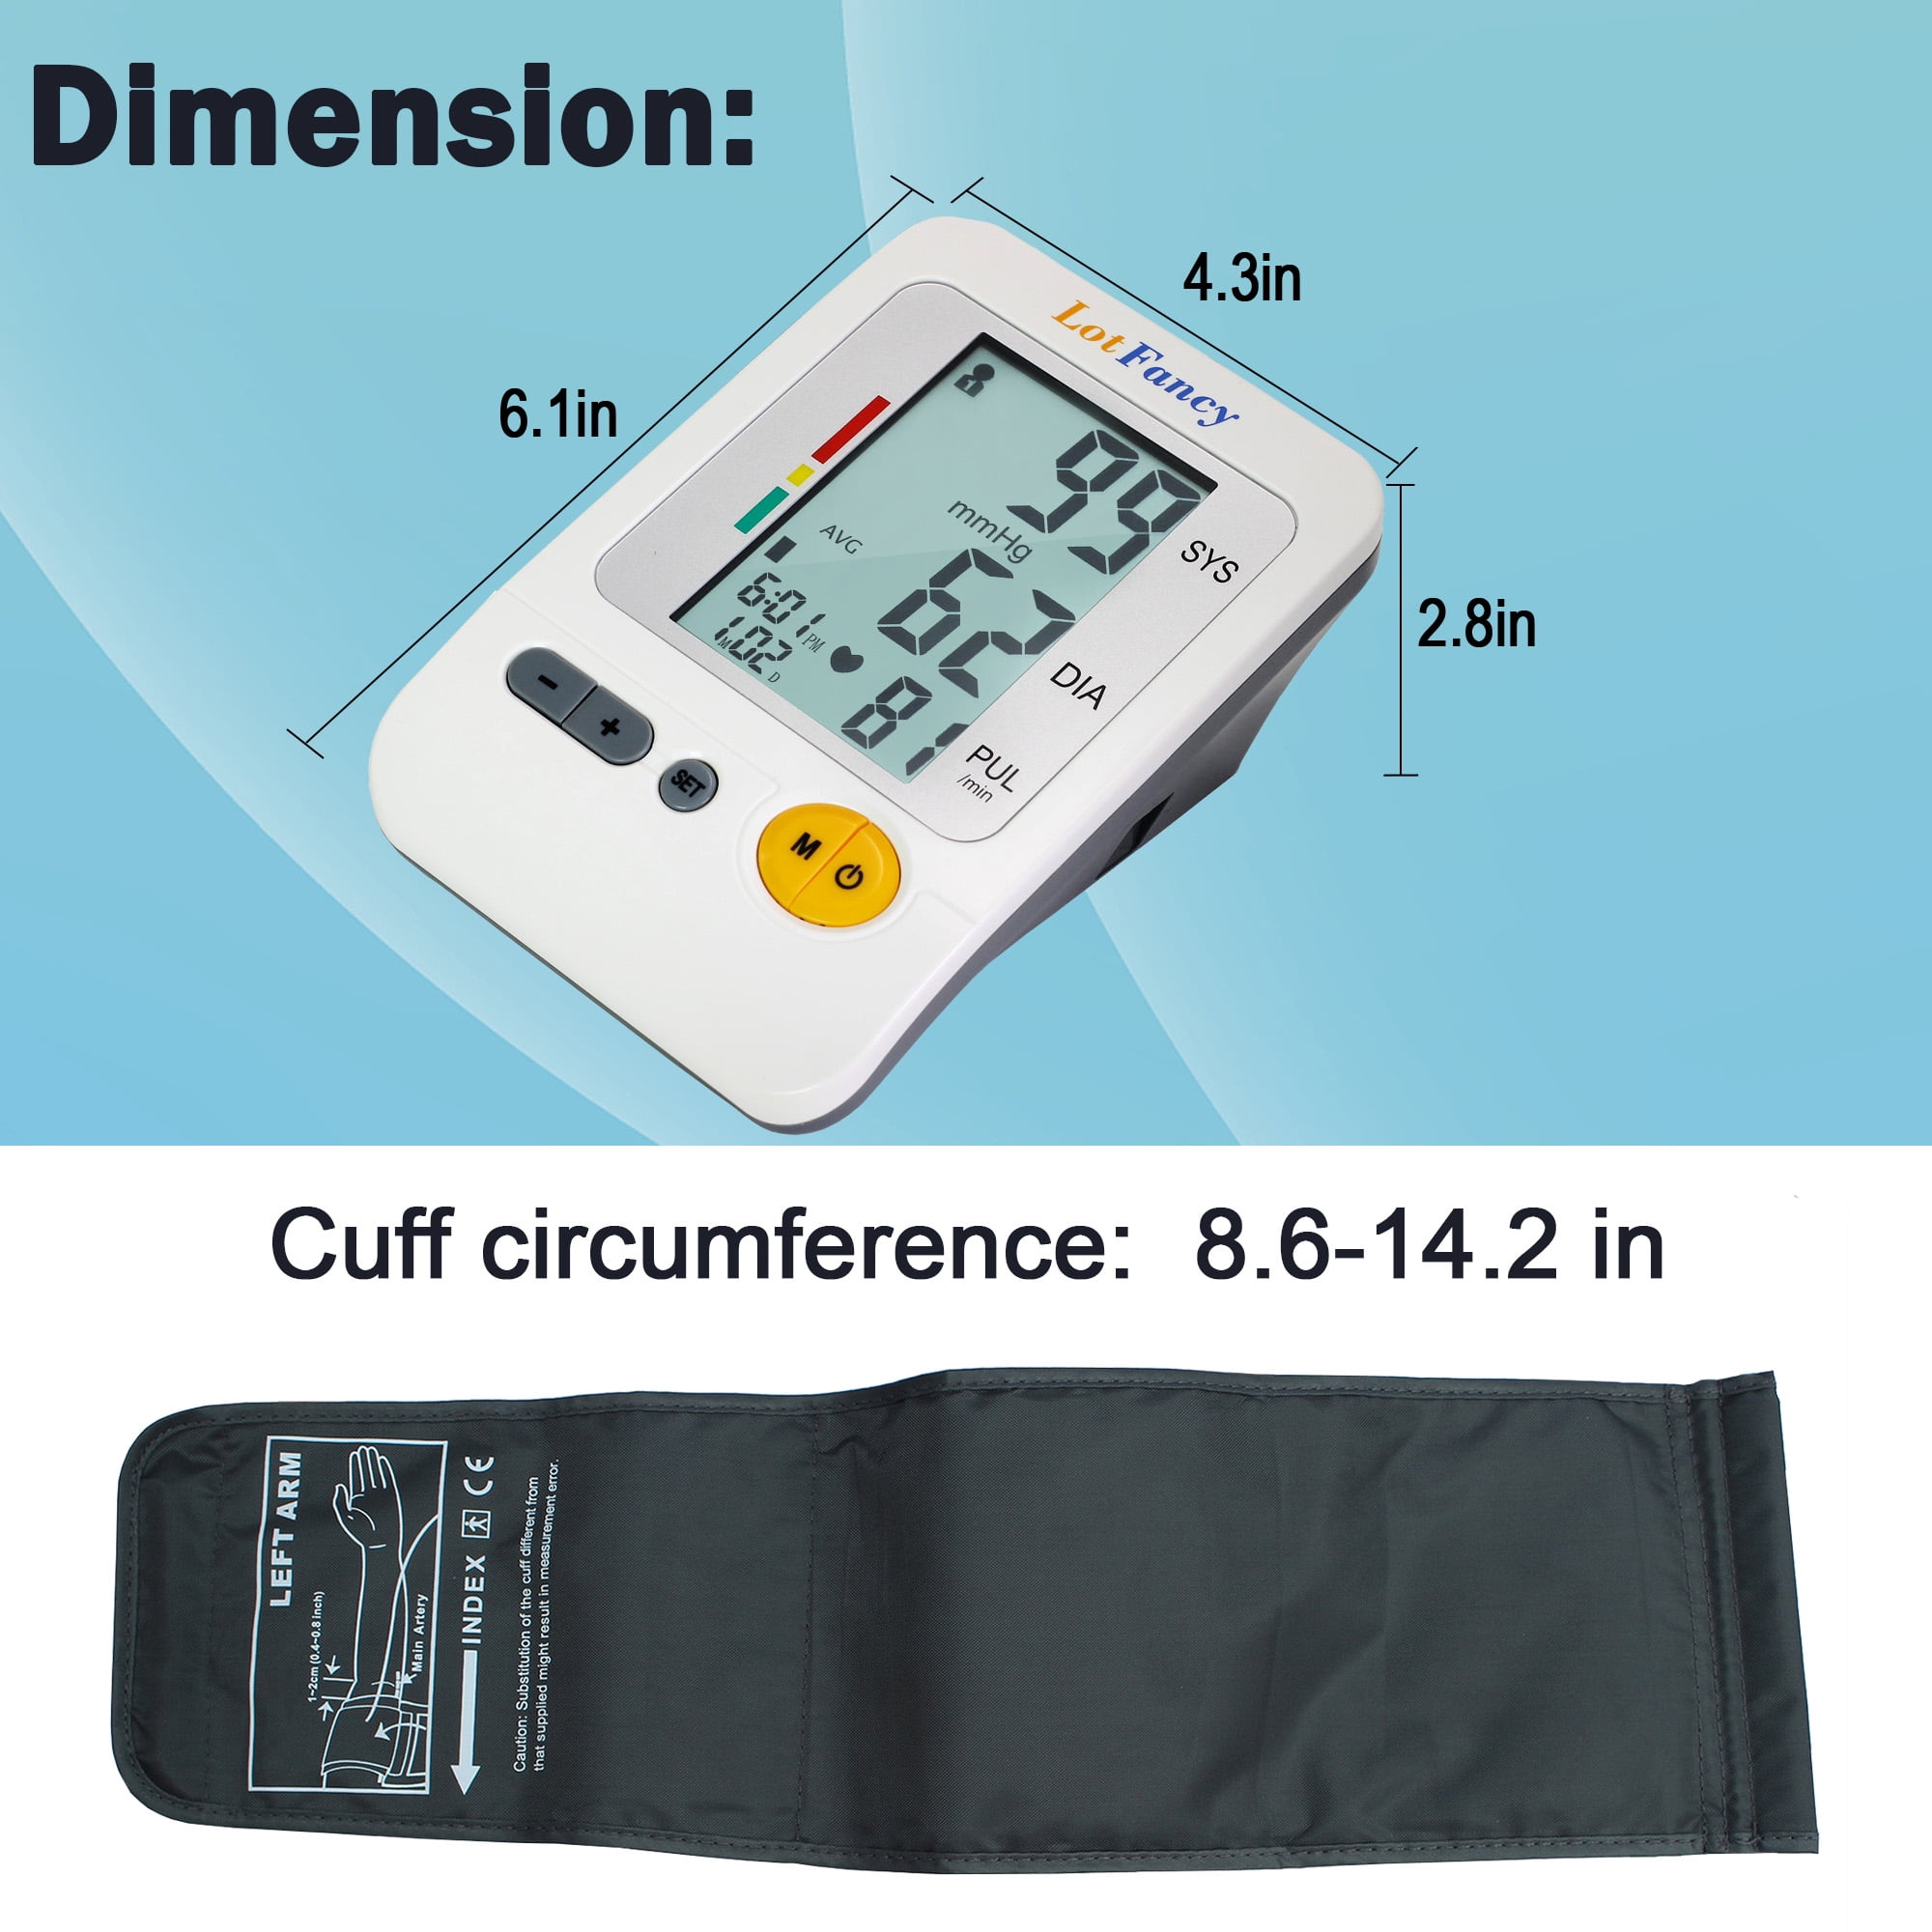 Lumeon™️ Wall Mounted Blood Pressure Unit with Adult Cuff & Clock